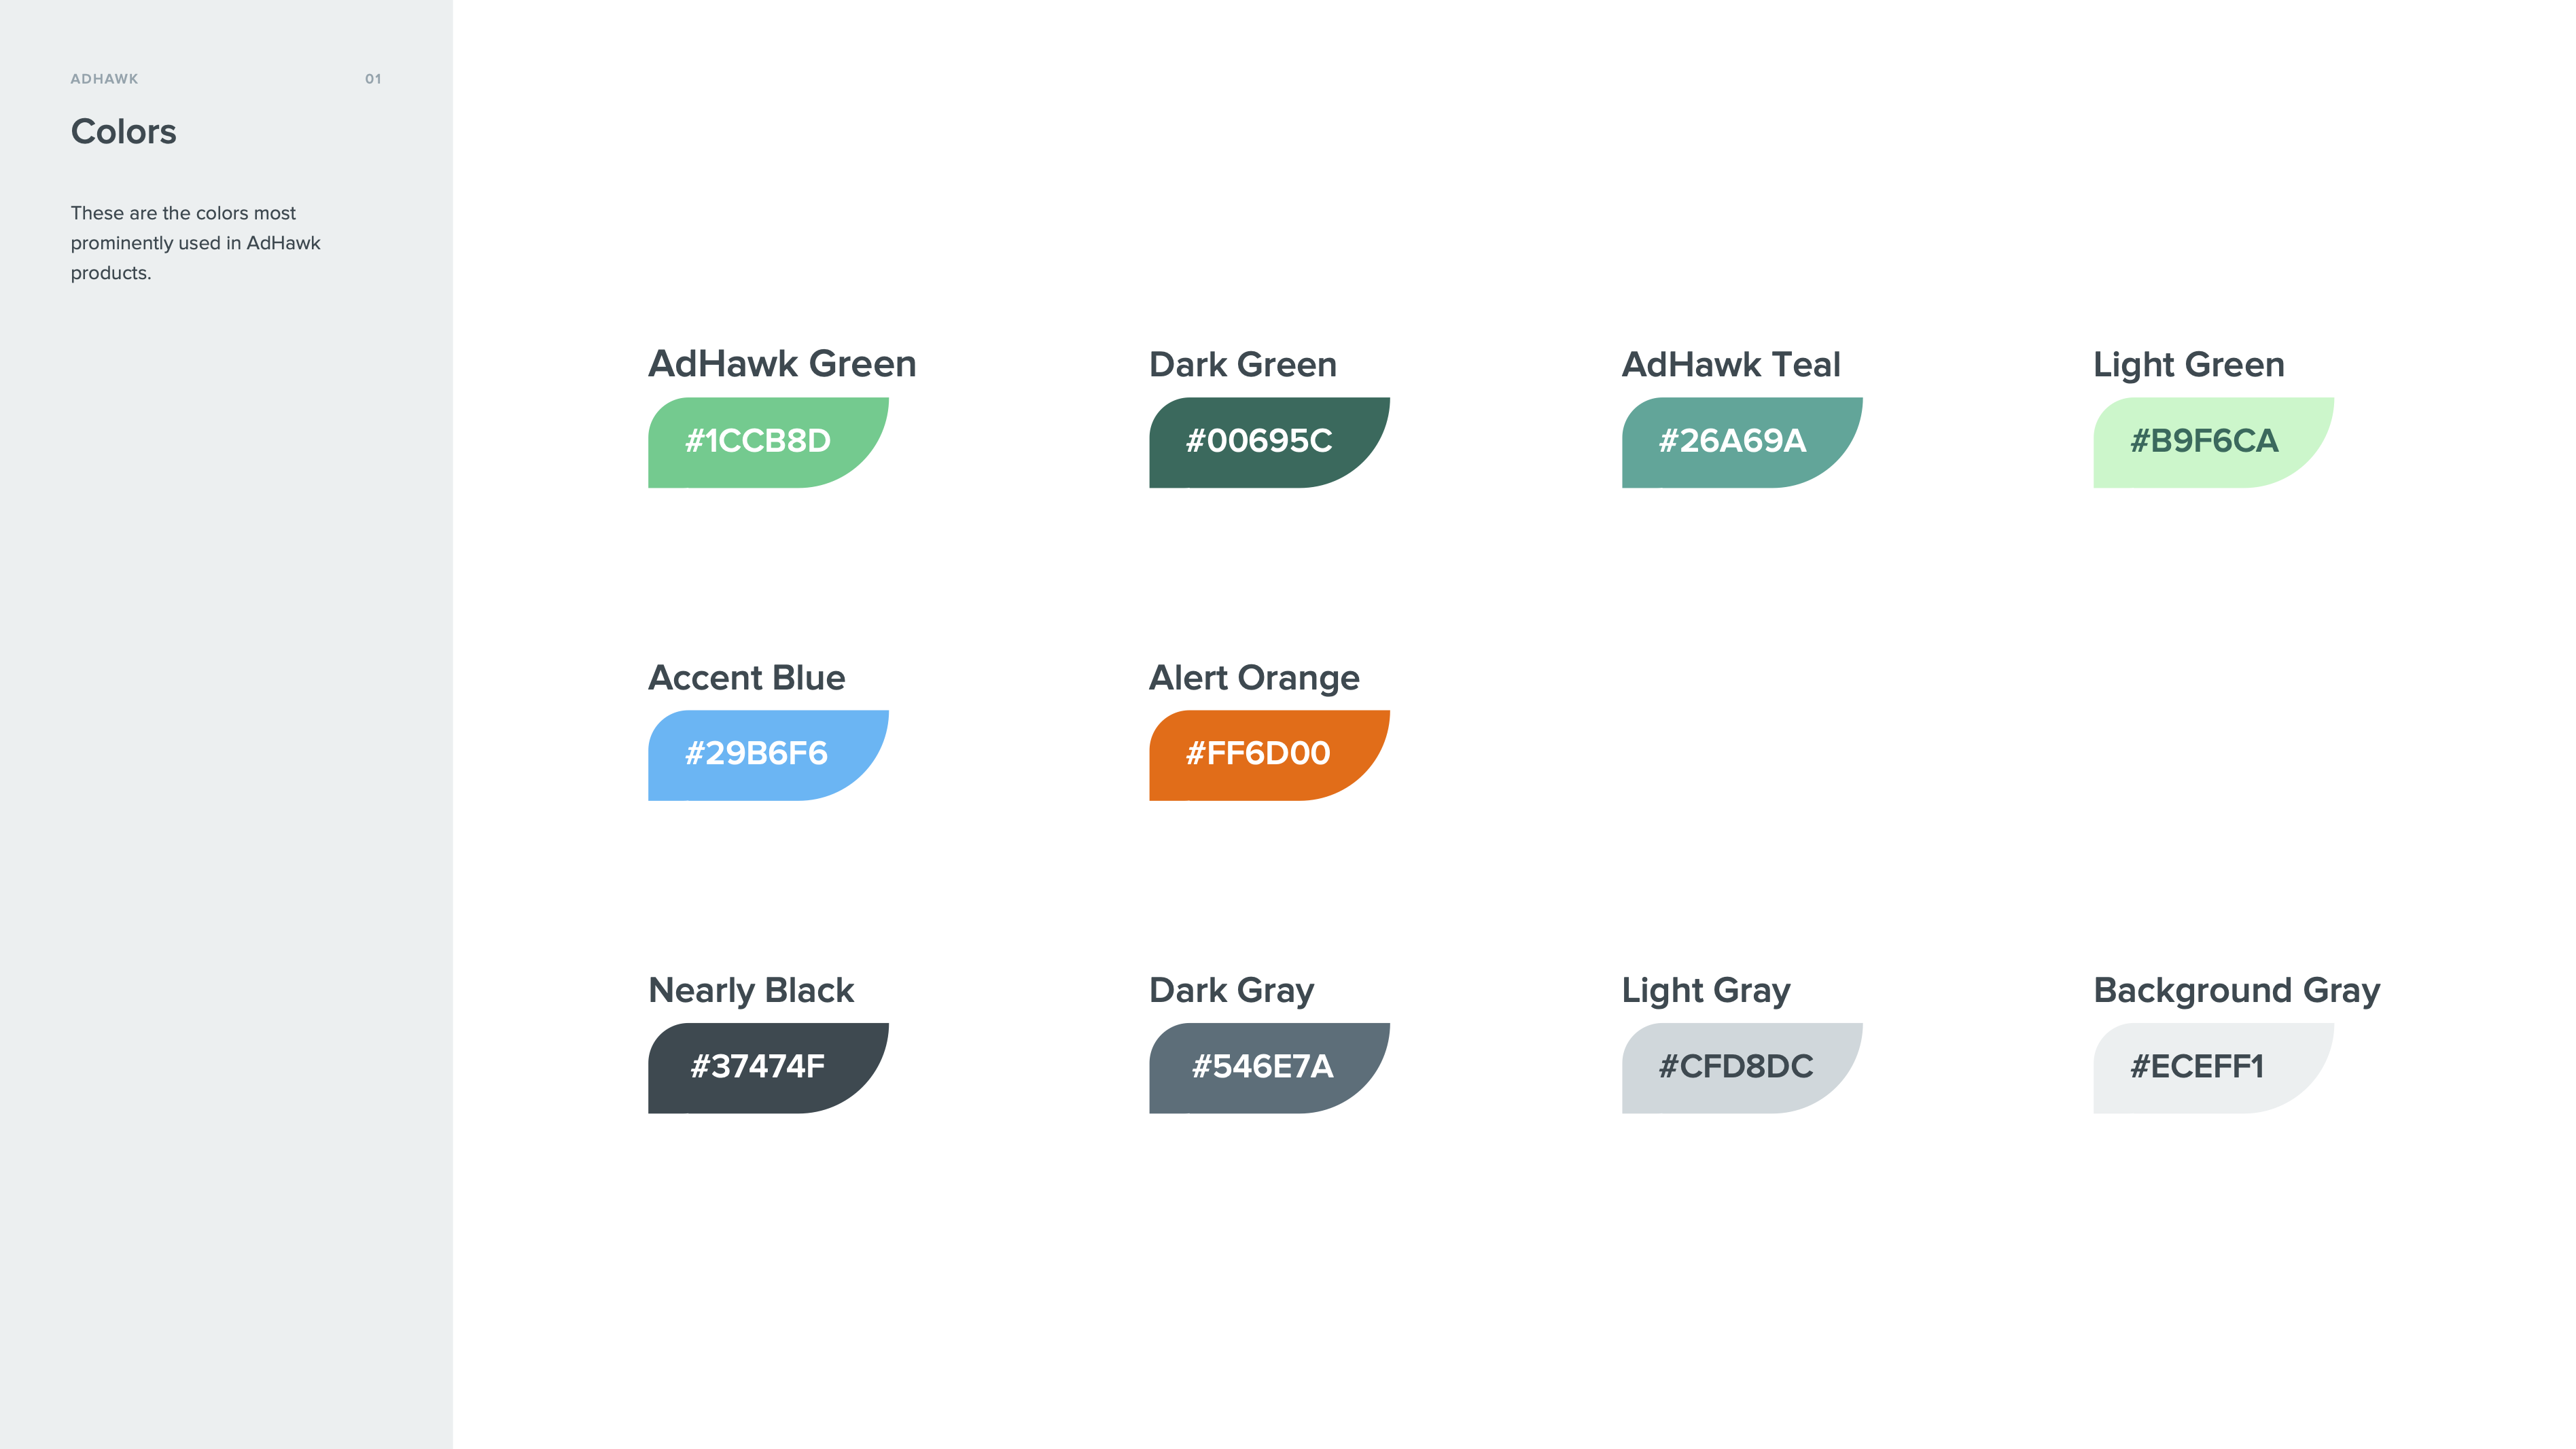 AdHawk Brand Guidelines - Colors